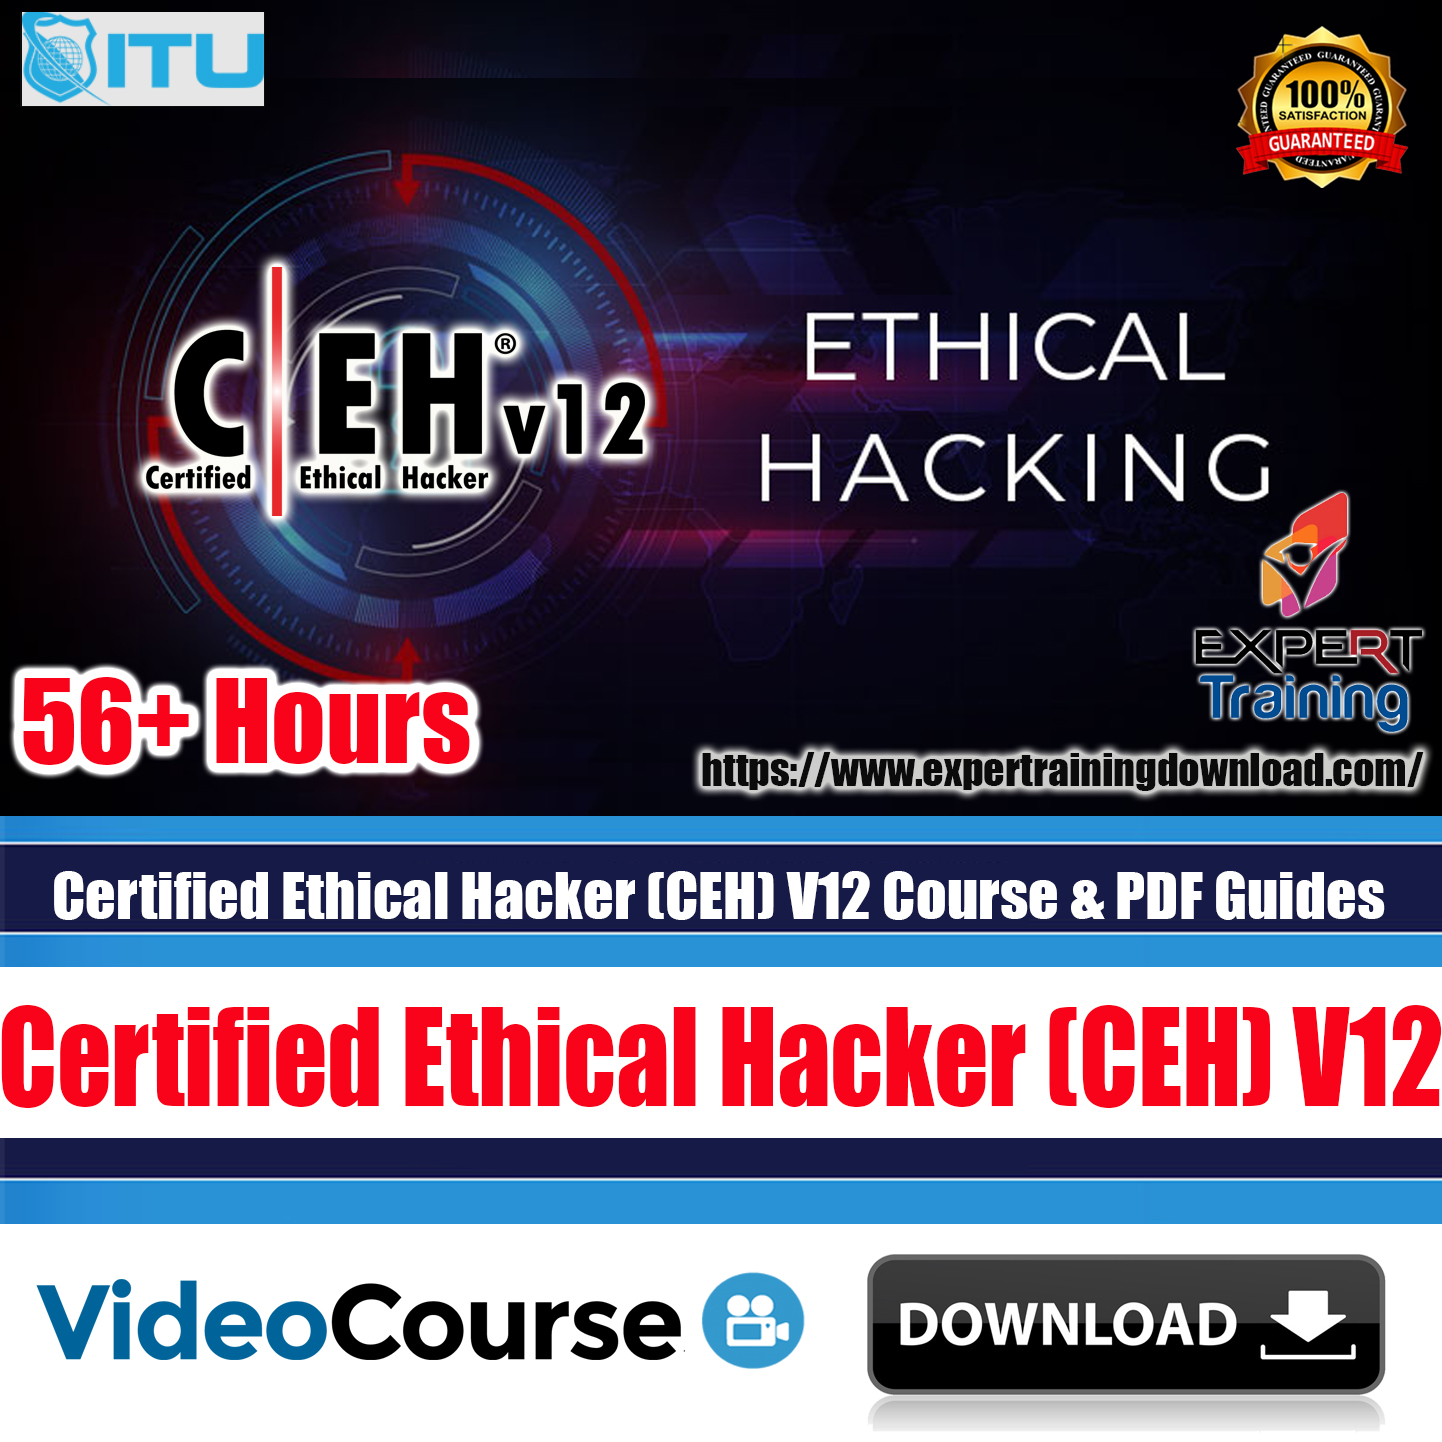 Certified Ethical Hacker (CEH) V12 Course & PDF Guides